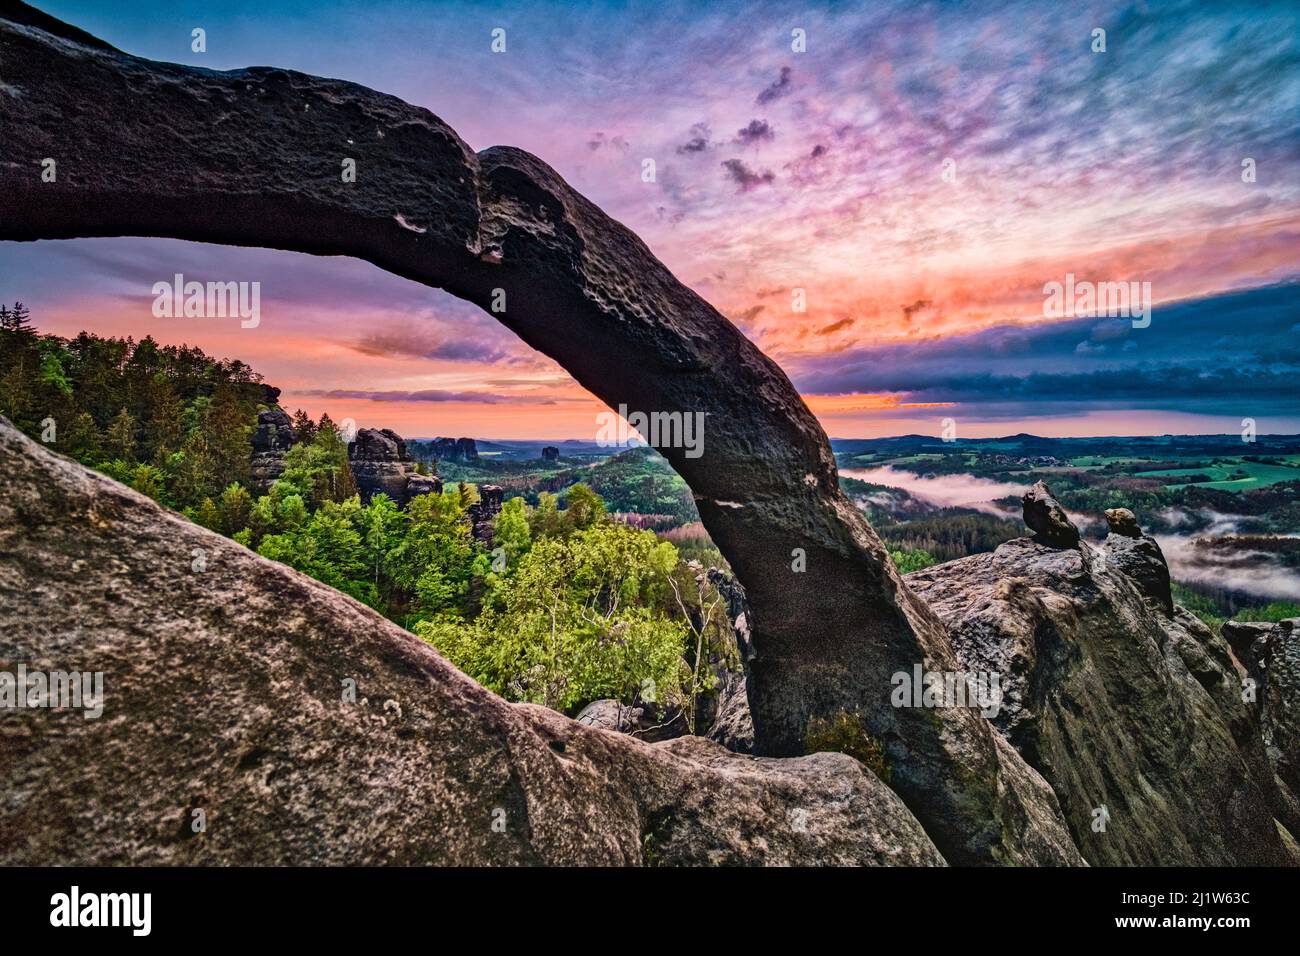 Landscape with rock formations in Affensteine area of the Saxon Switzerland National Park at sunset. Stock Photo